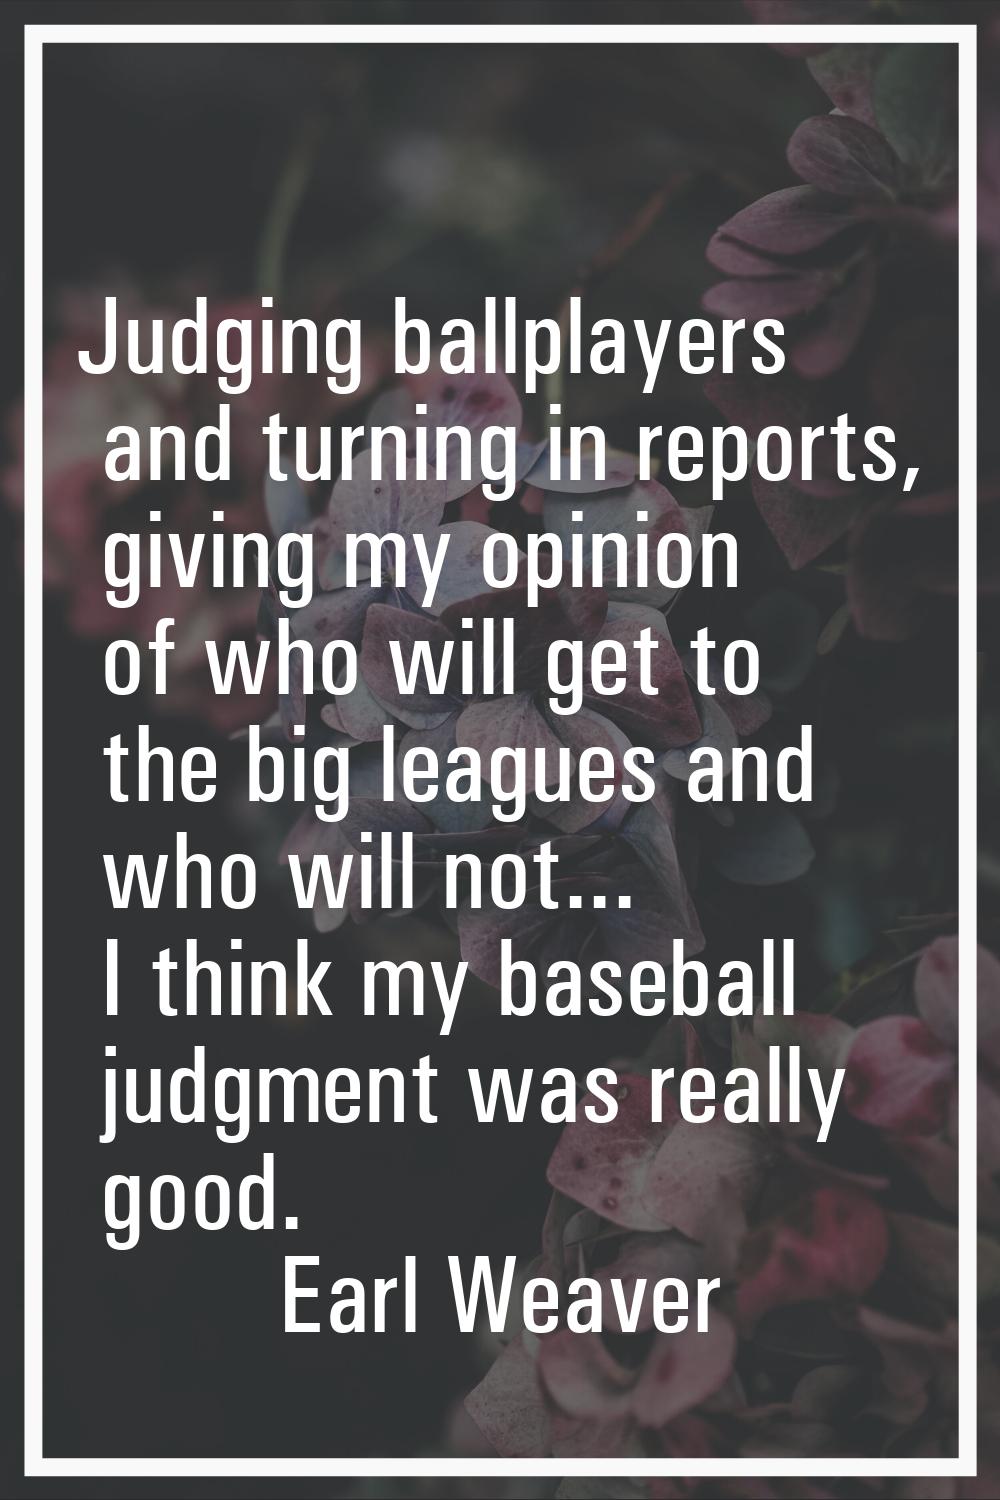 Judging ballplayers and turning in reports, giving my opinion of who will get to the big leagues an